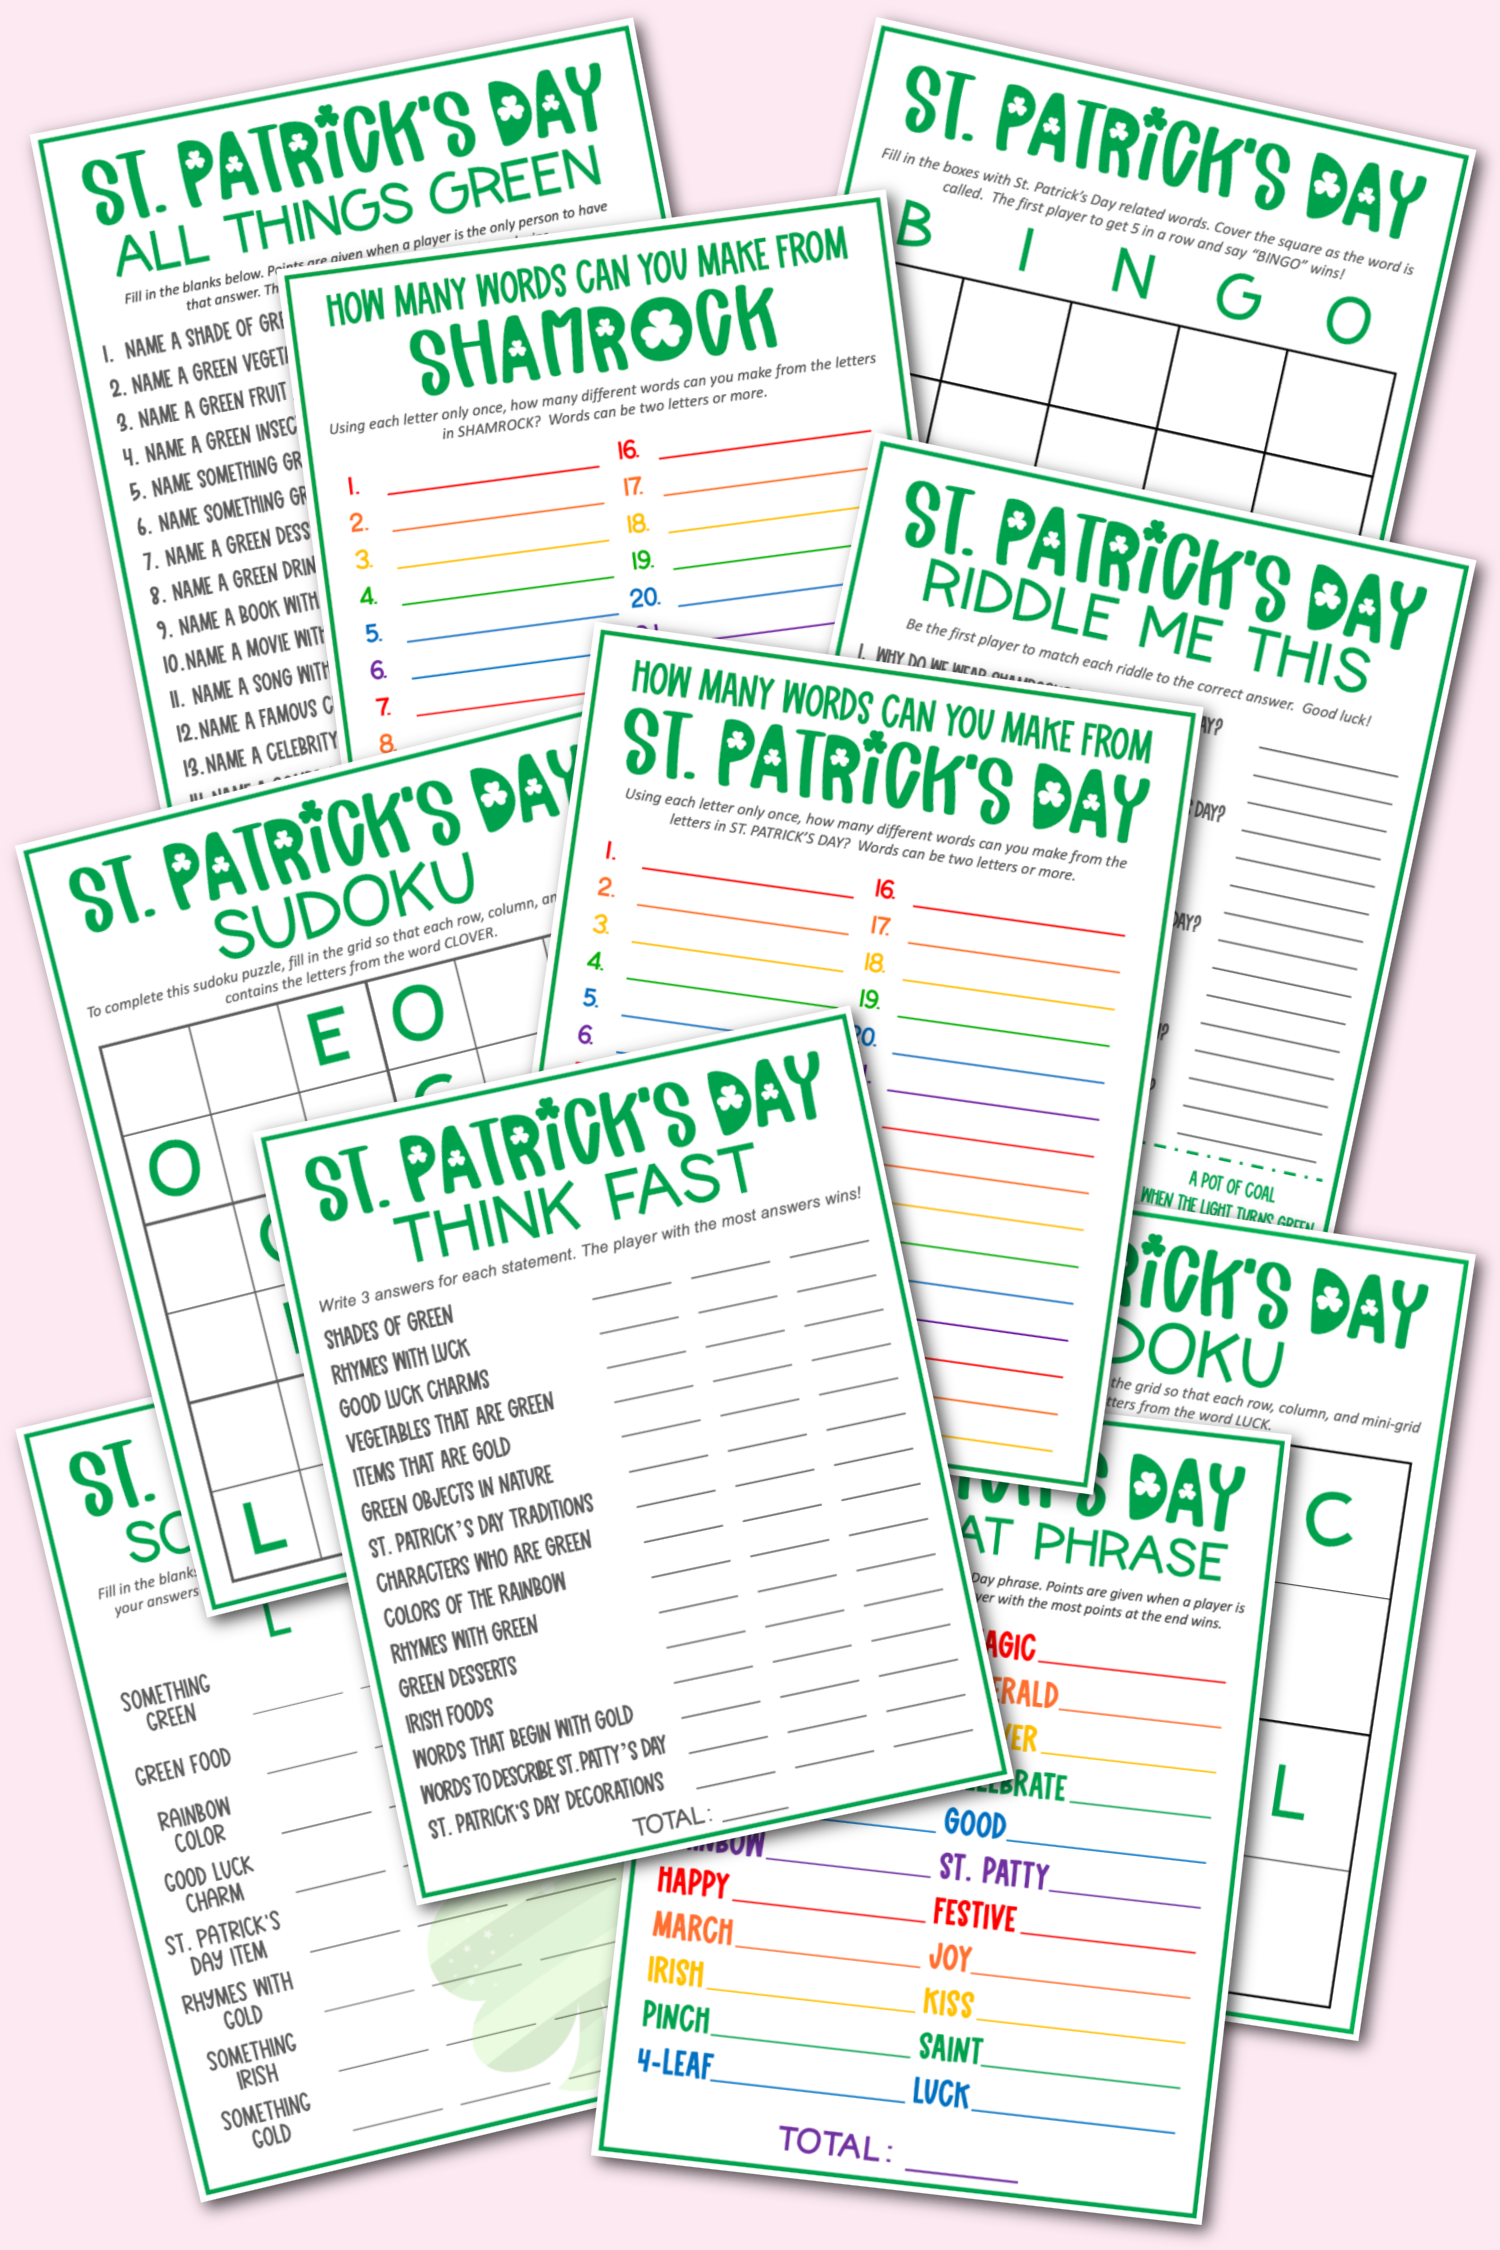 St. Patrick's Day Game Pack Free Printable Games for kids of all ages